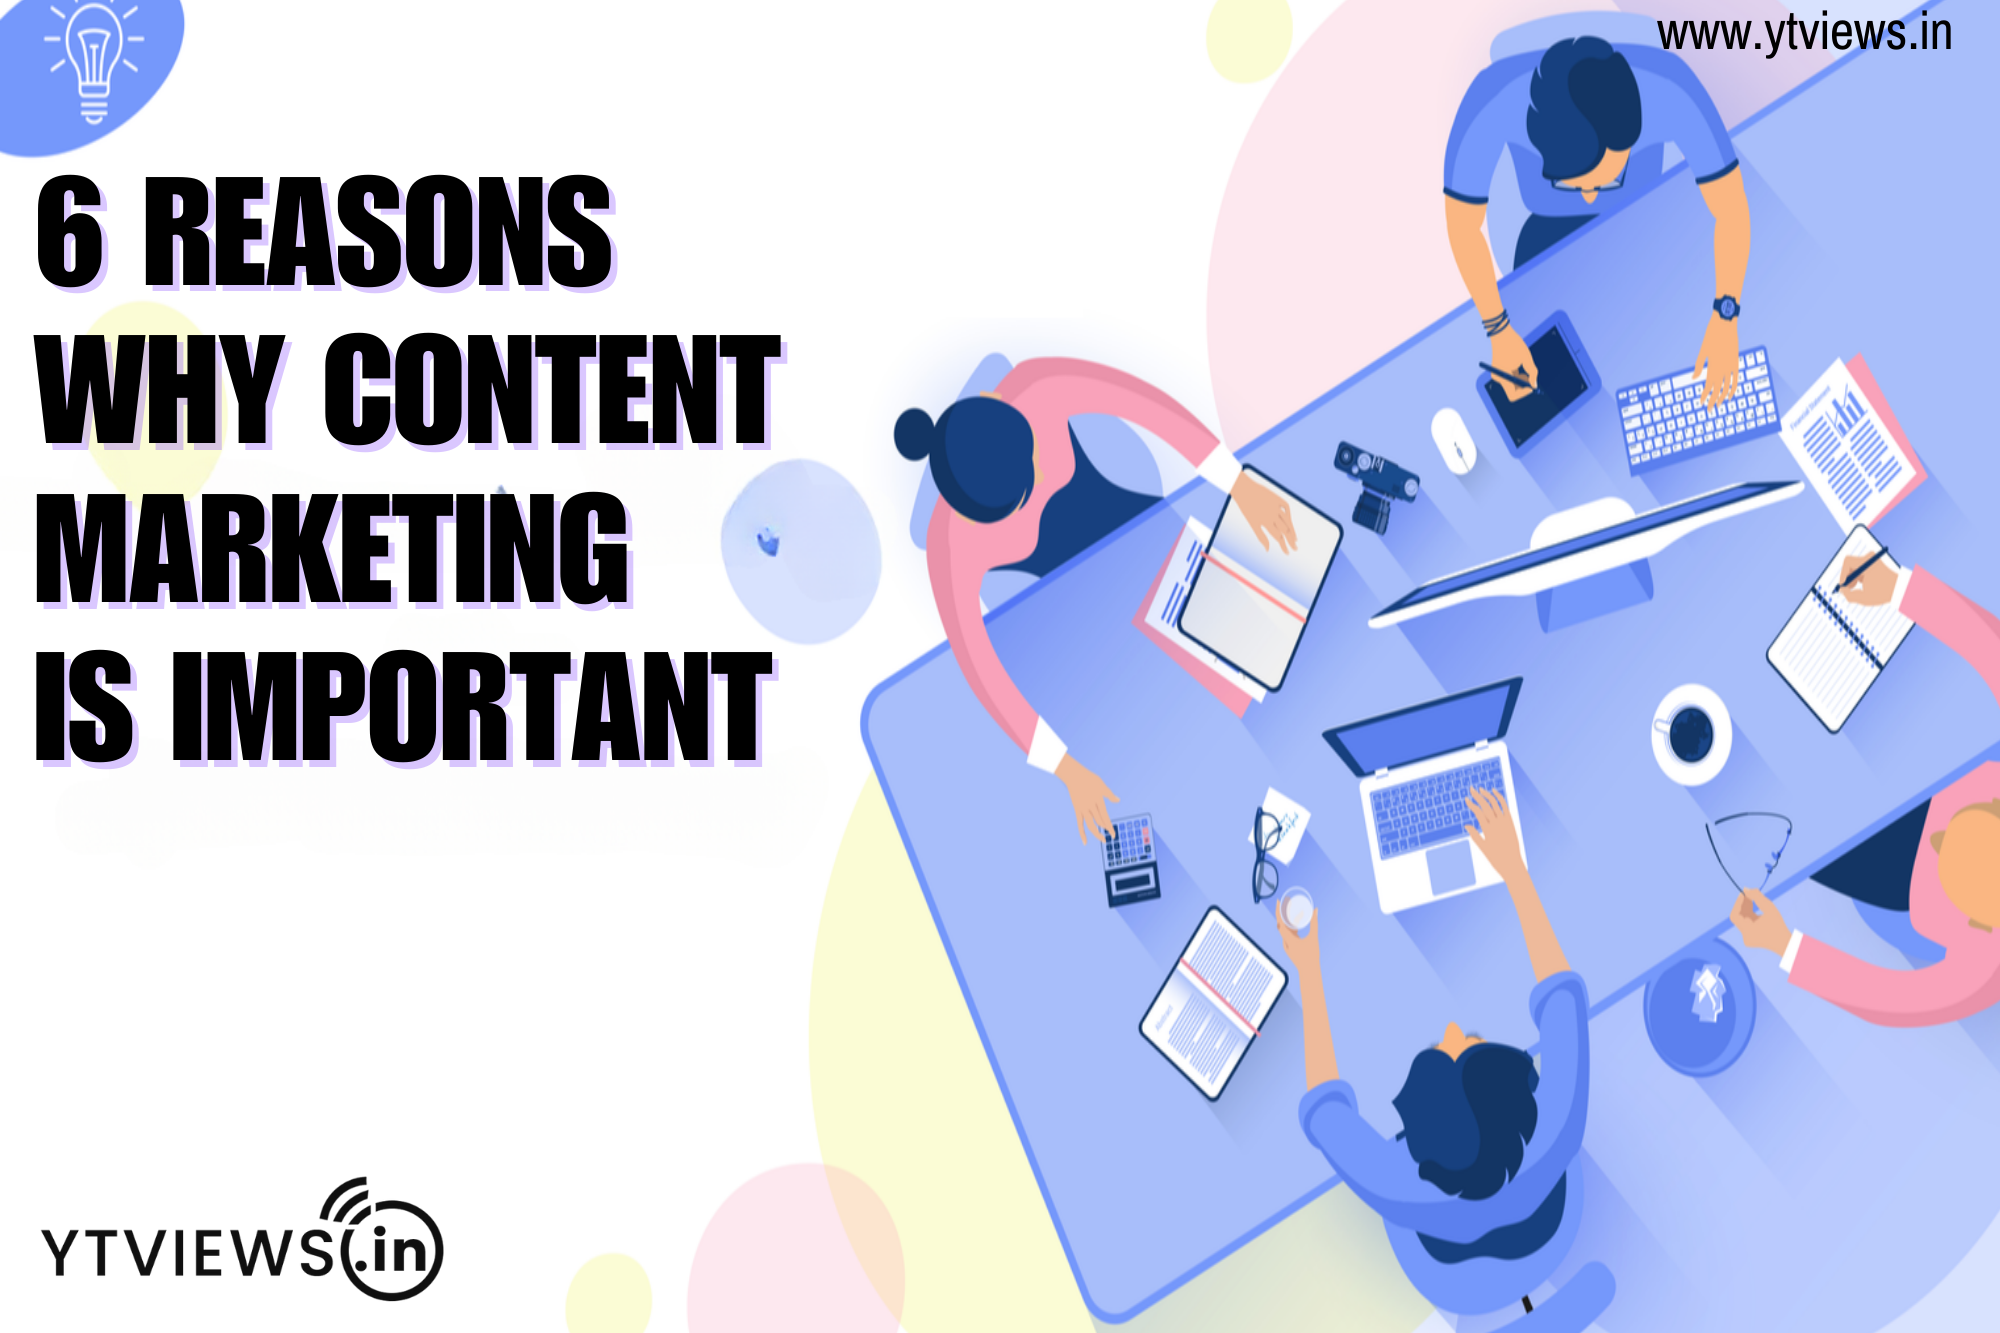 6 reasons why content marketing is important